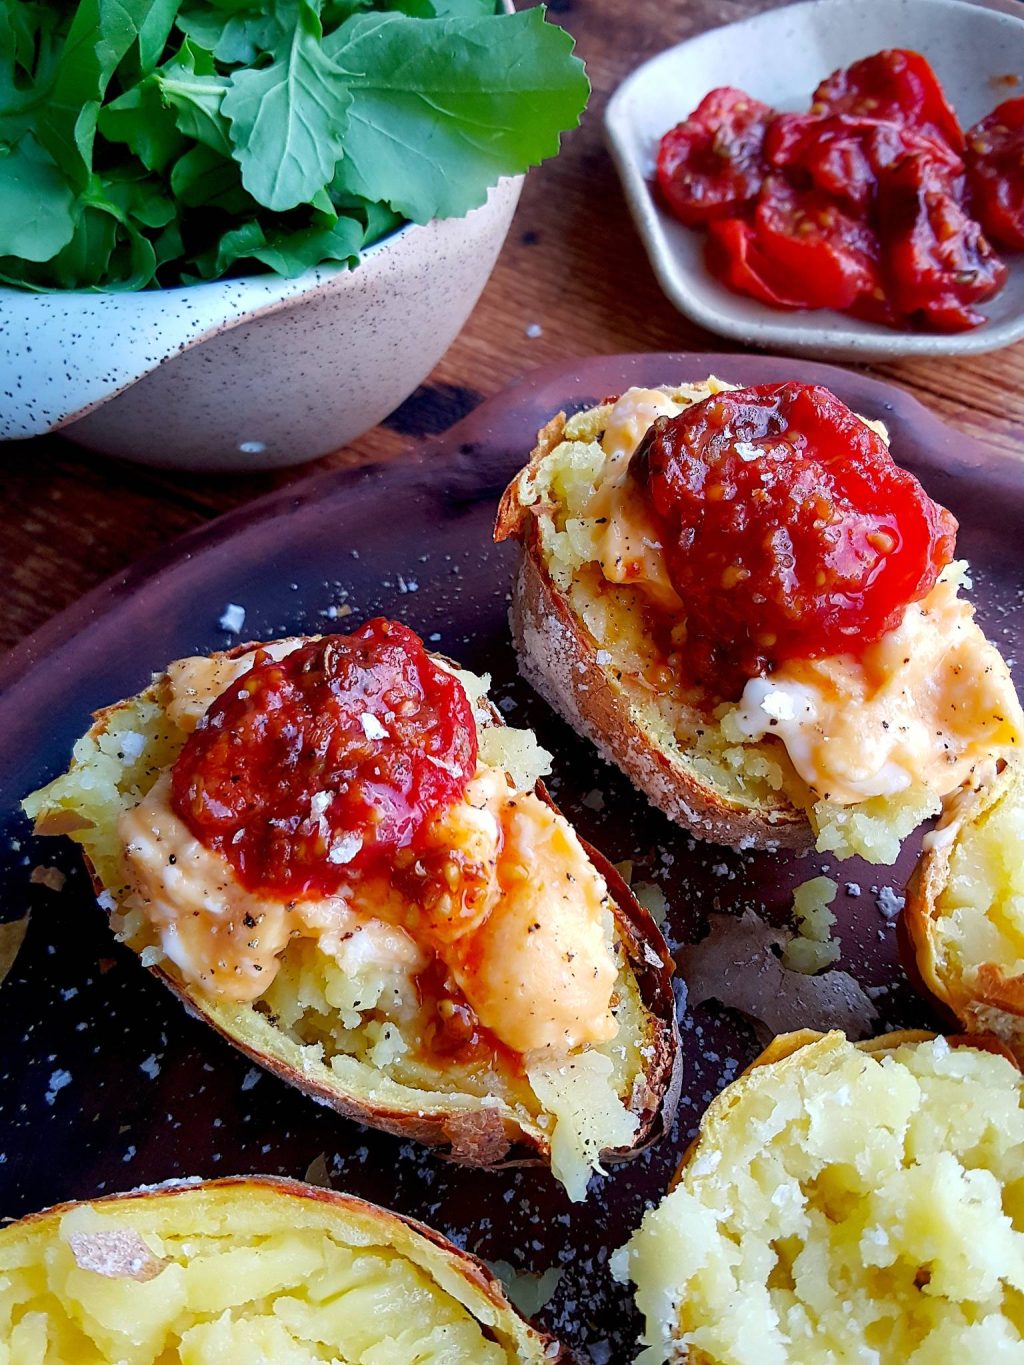 Jacket-baked Potatoes Revisited